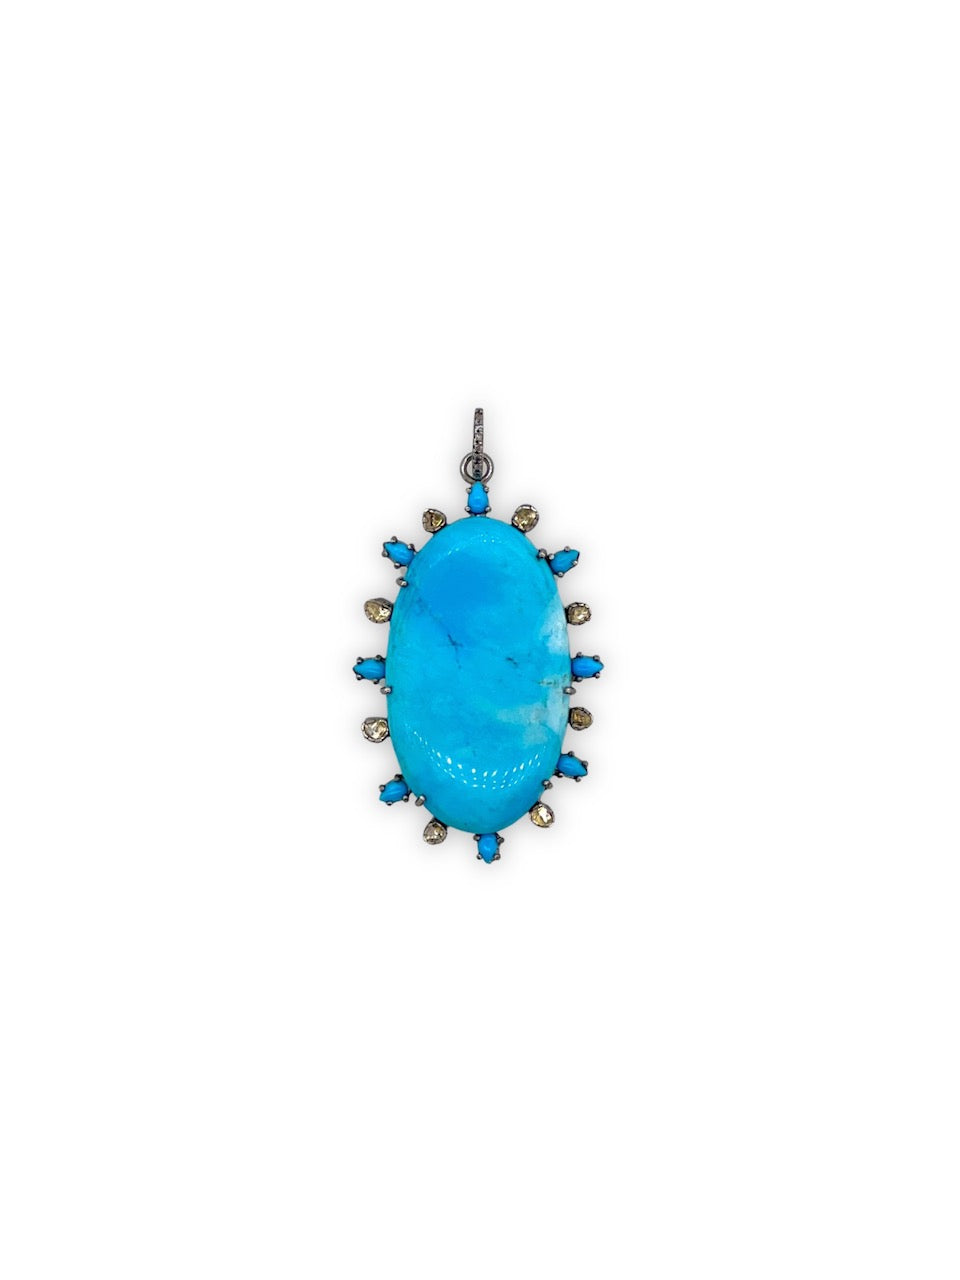 Turquoise with Polki and Pave Diamonds set in Sterling Silver